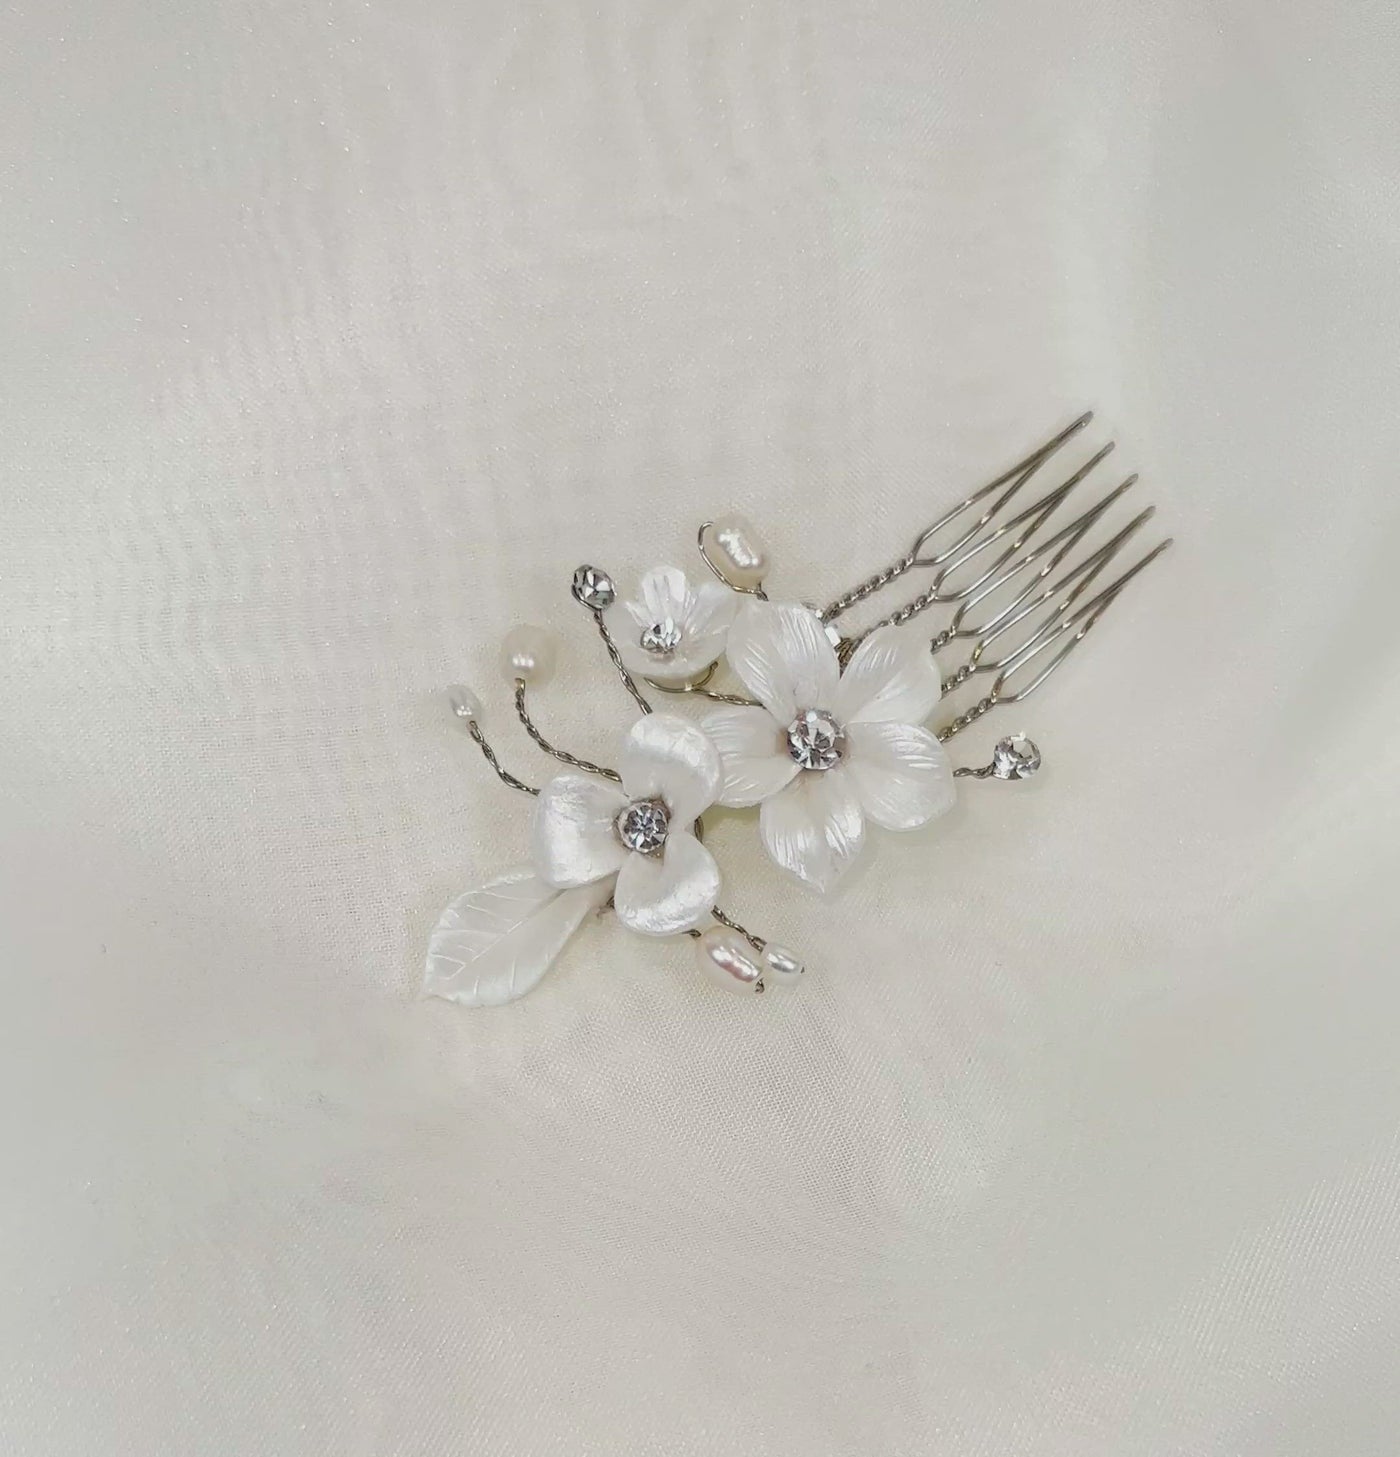 single bridal hair pin with shiny white porcelain flowers and small sprigs of crystal and pearl